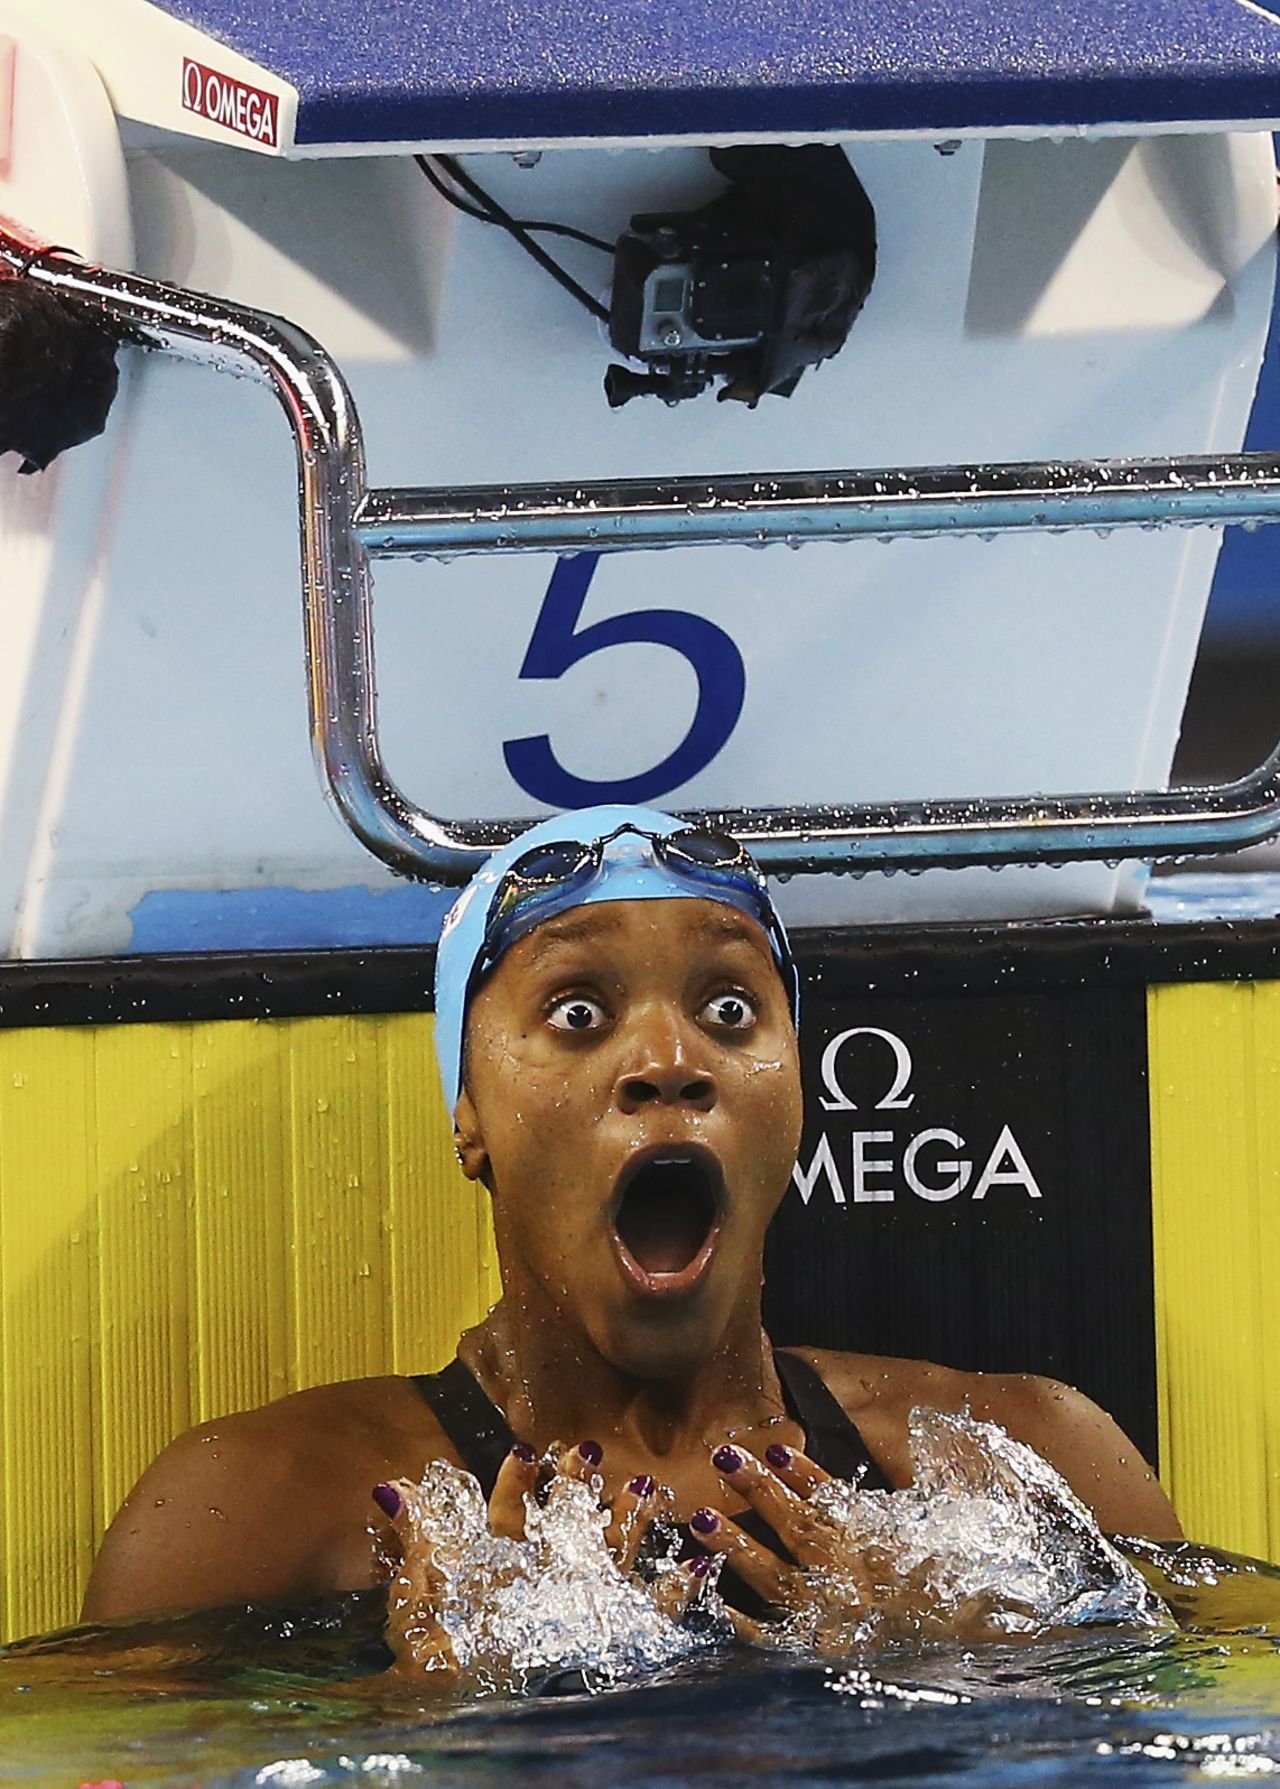 A look of disbelief is etched on the face of <a href="http://www.cnn.com/2014/12/07/sport/swimming-atkinson-world-first/index.html" target="_blank">Alia Atkinson after she claims gold in the women's 100m breaststroke </a>at the world short course swimming championships in Qatar.  The win made her the first black woman swimmer to claim the world title.  Click through the gallery for more female sports firsts: